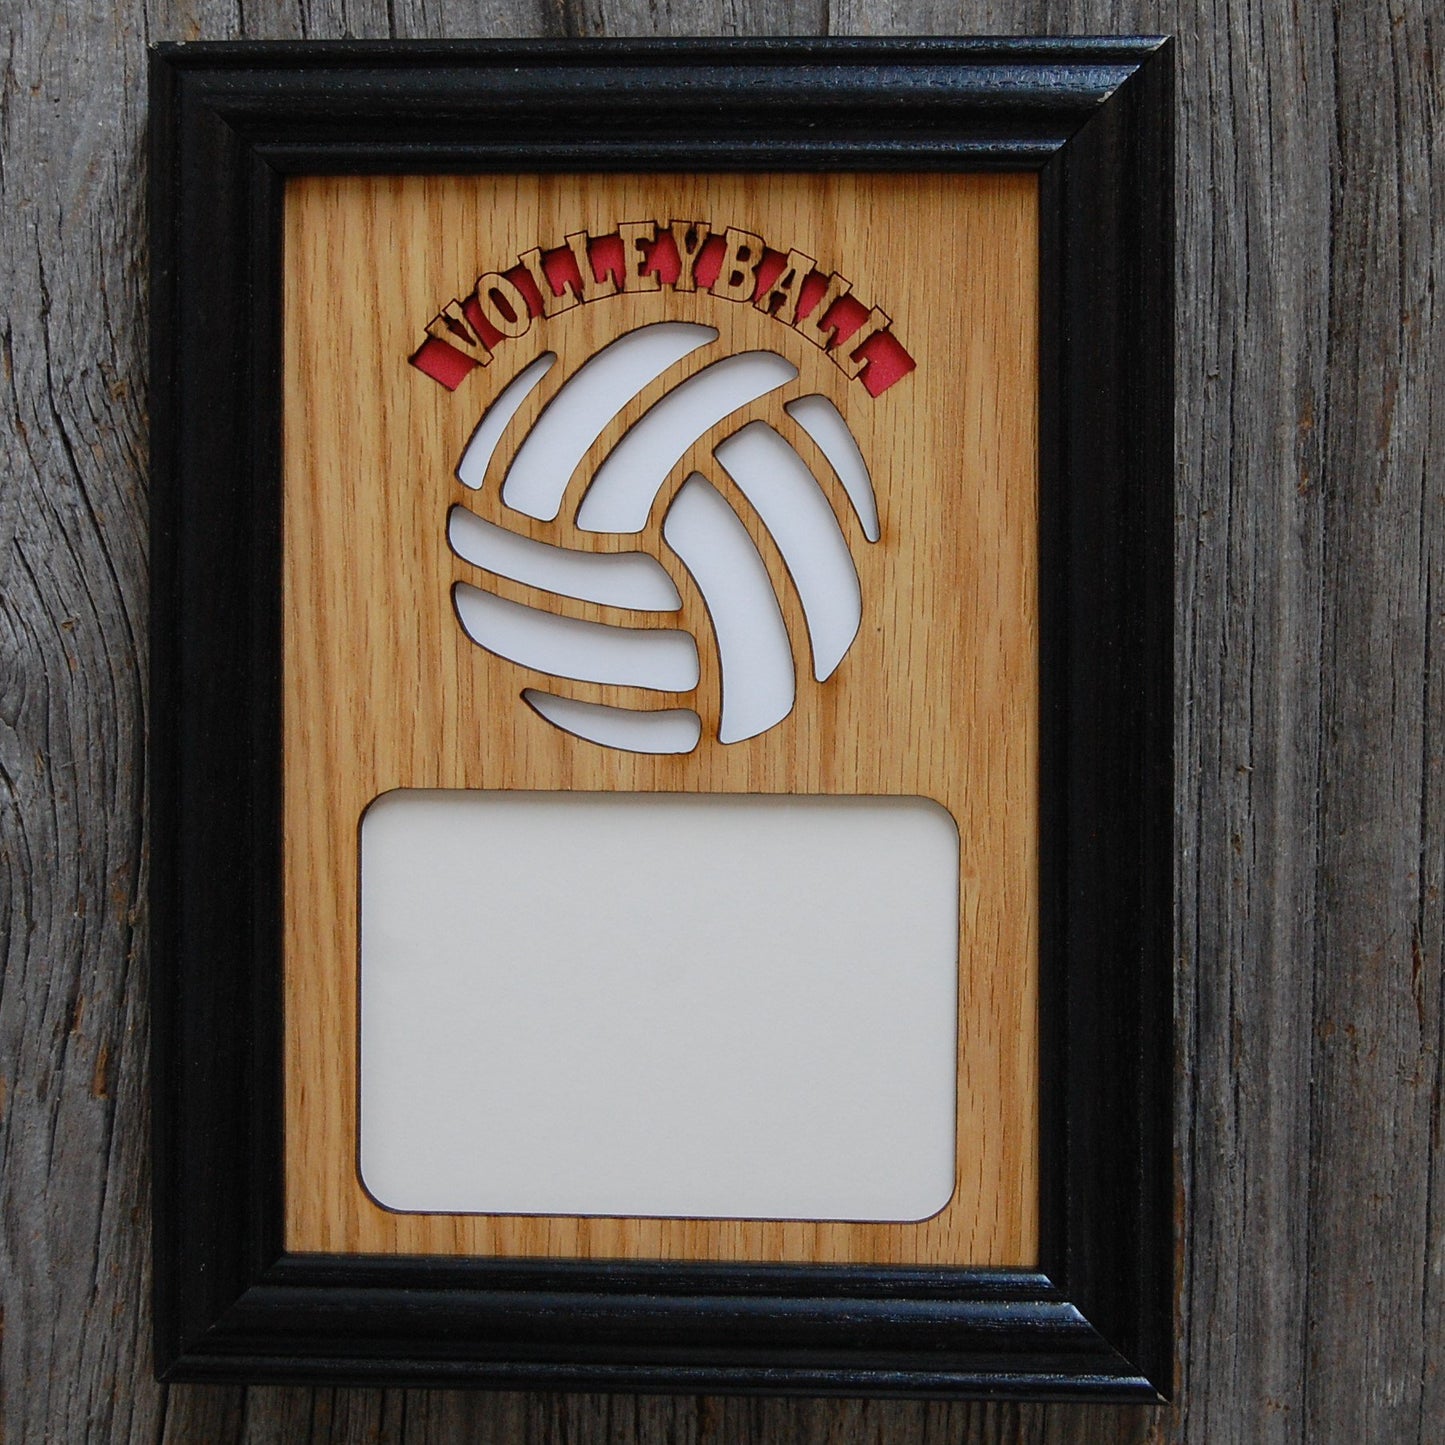 Sports Picture Frame